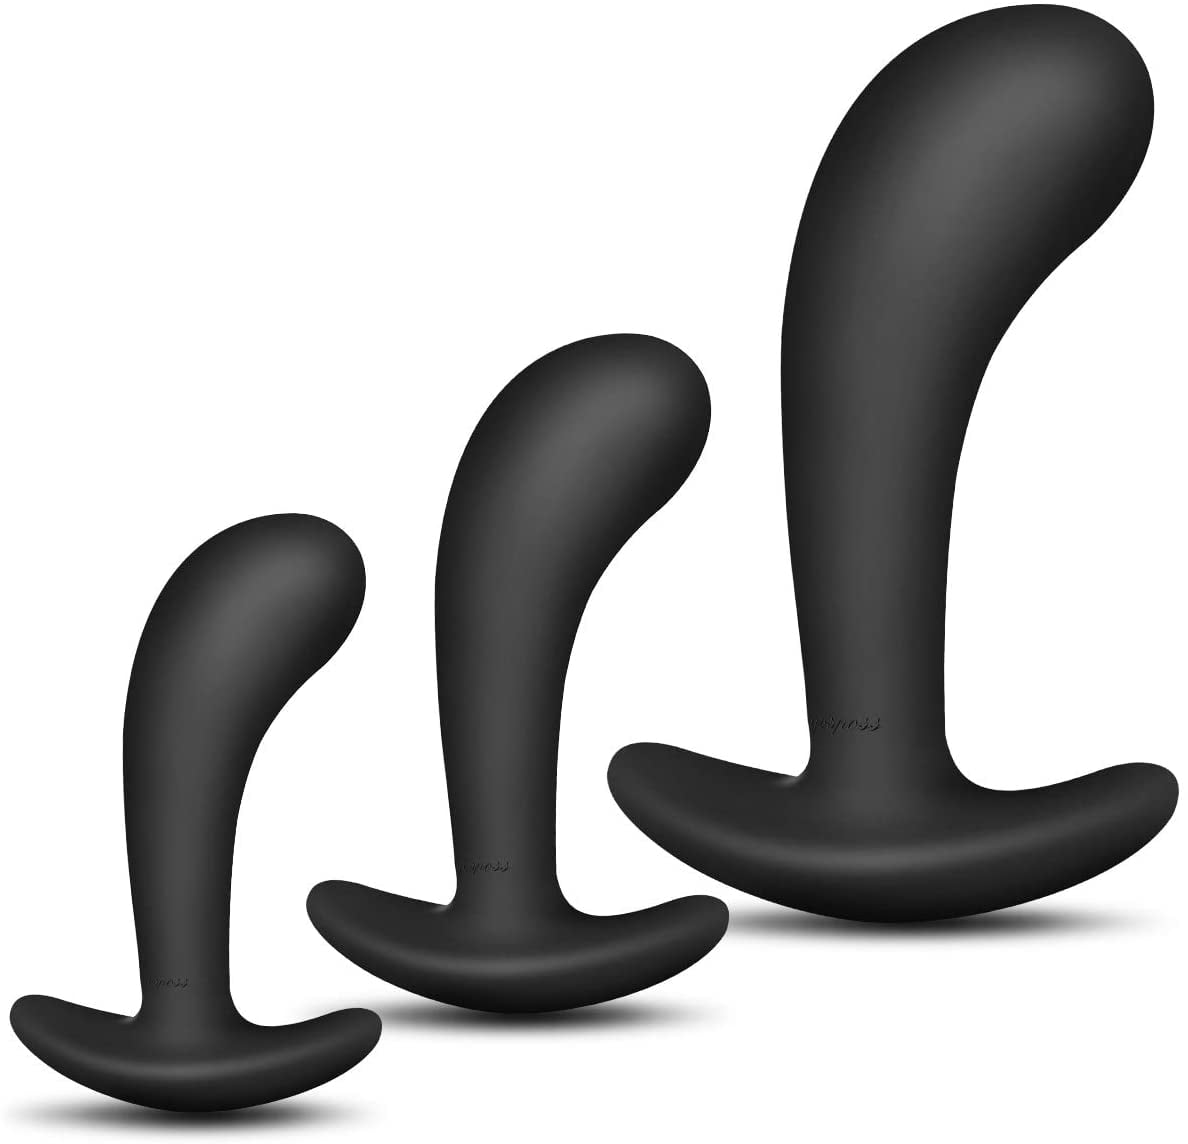 3 Pieces of Anal Plug, Sexy Toys Anal Plug Set Silicone Anal Butt Plug Adult Sex Toys for Women,Men and Beginners